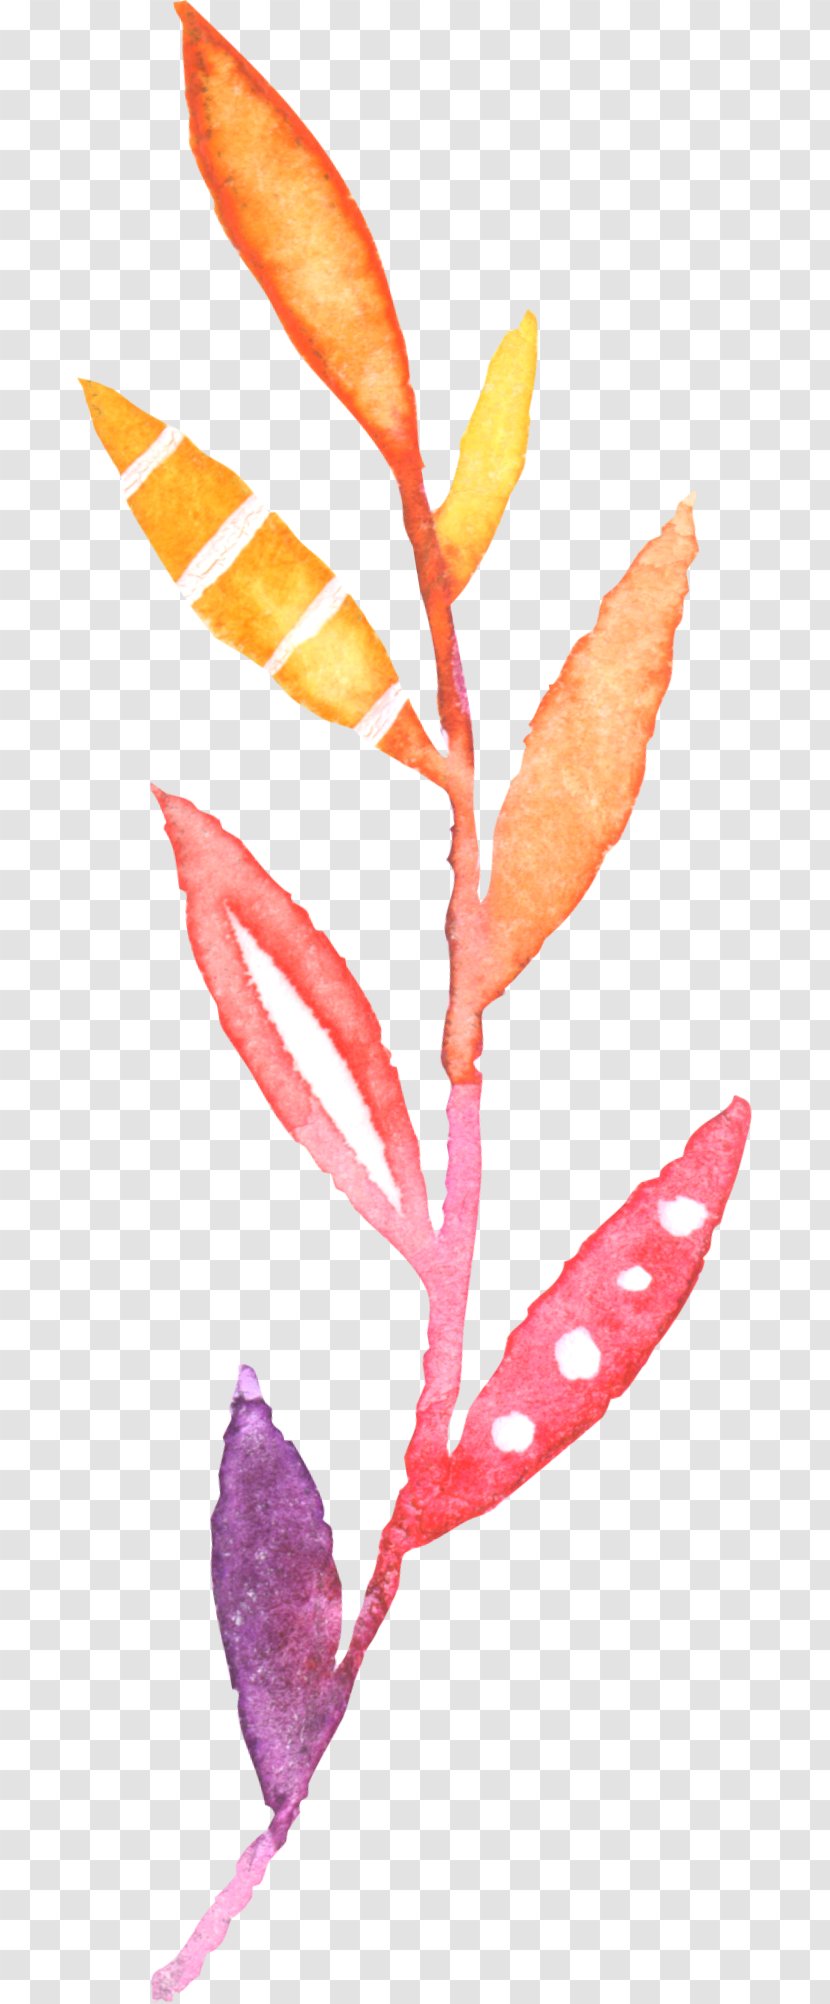 Watercolor: Flowers Watercolor Painting - Leaf - Hand-painted Plant Transparent PNG